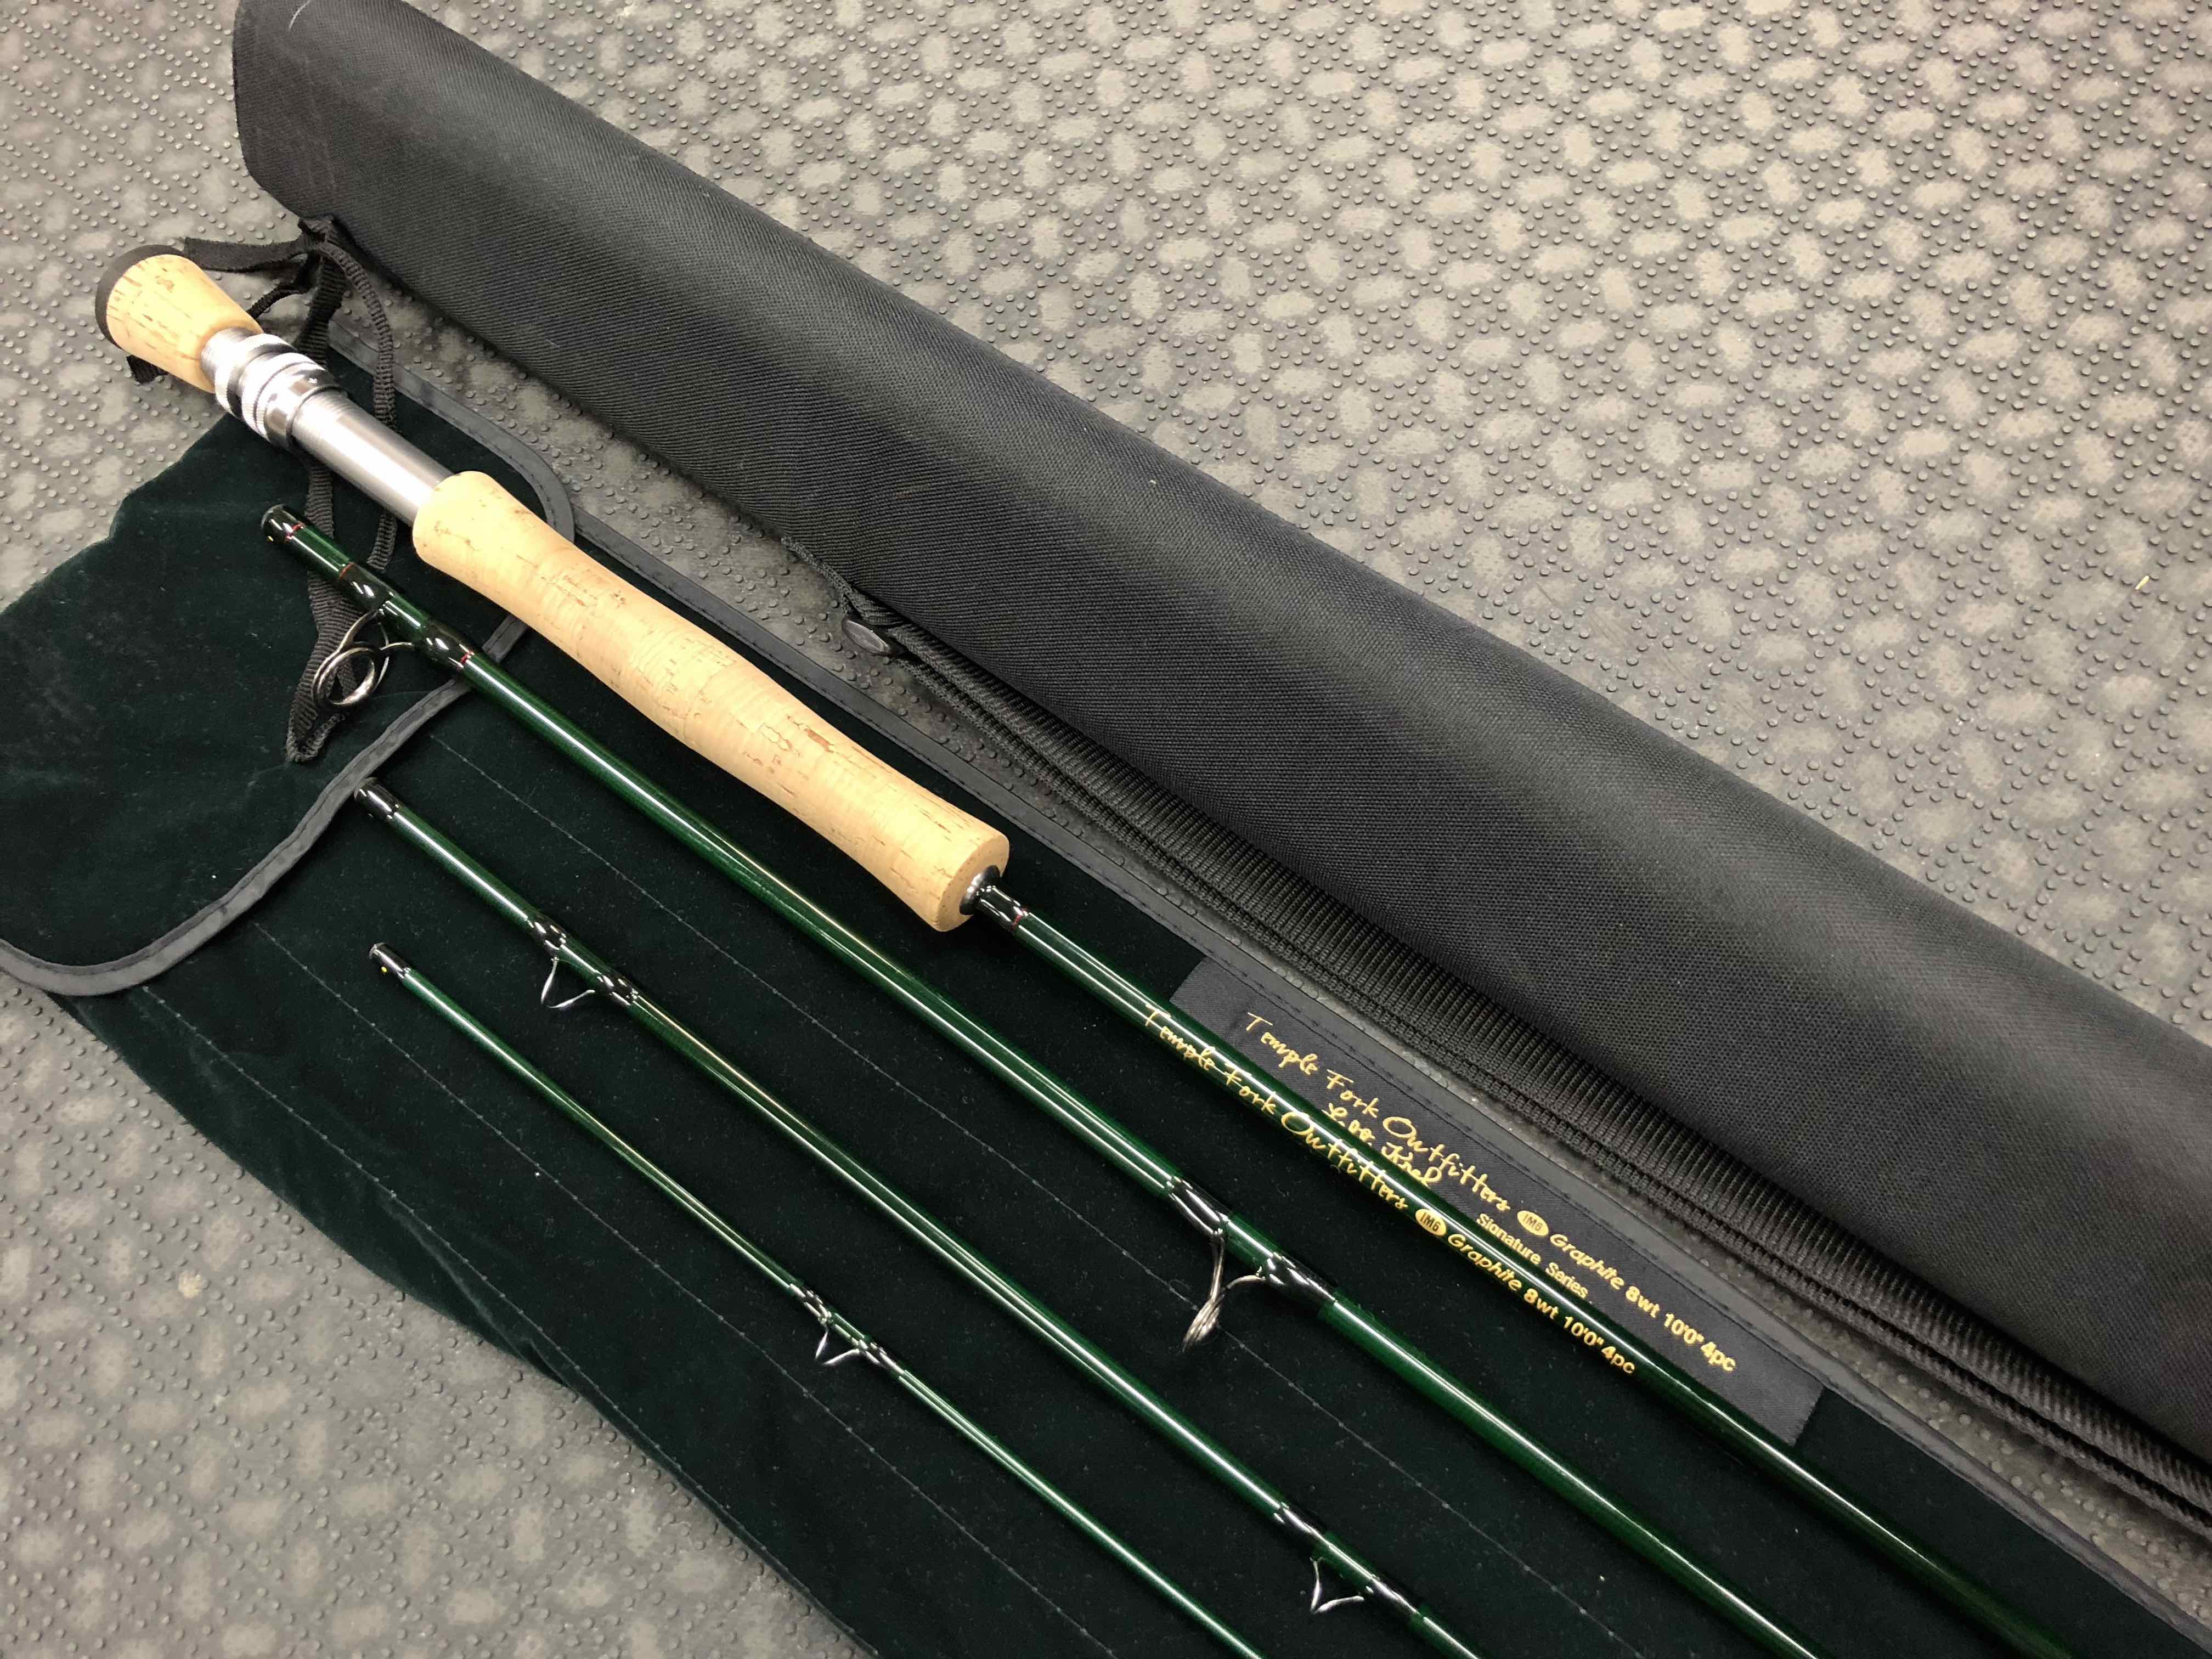 TFO Temple Fork Outfitters Fly Rod - Lefty Kreh Signature Series - 10’ 8wt 4pc c/w Rod Sock & Tube - LIKE NEW! - $150